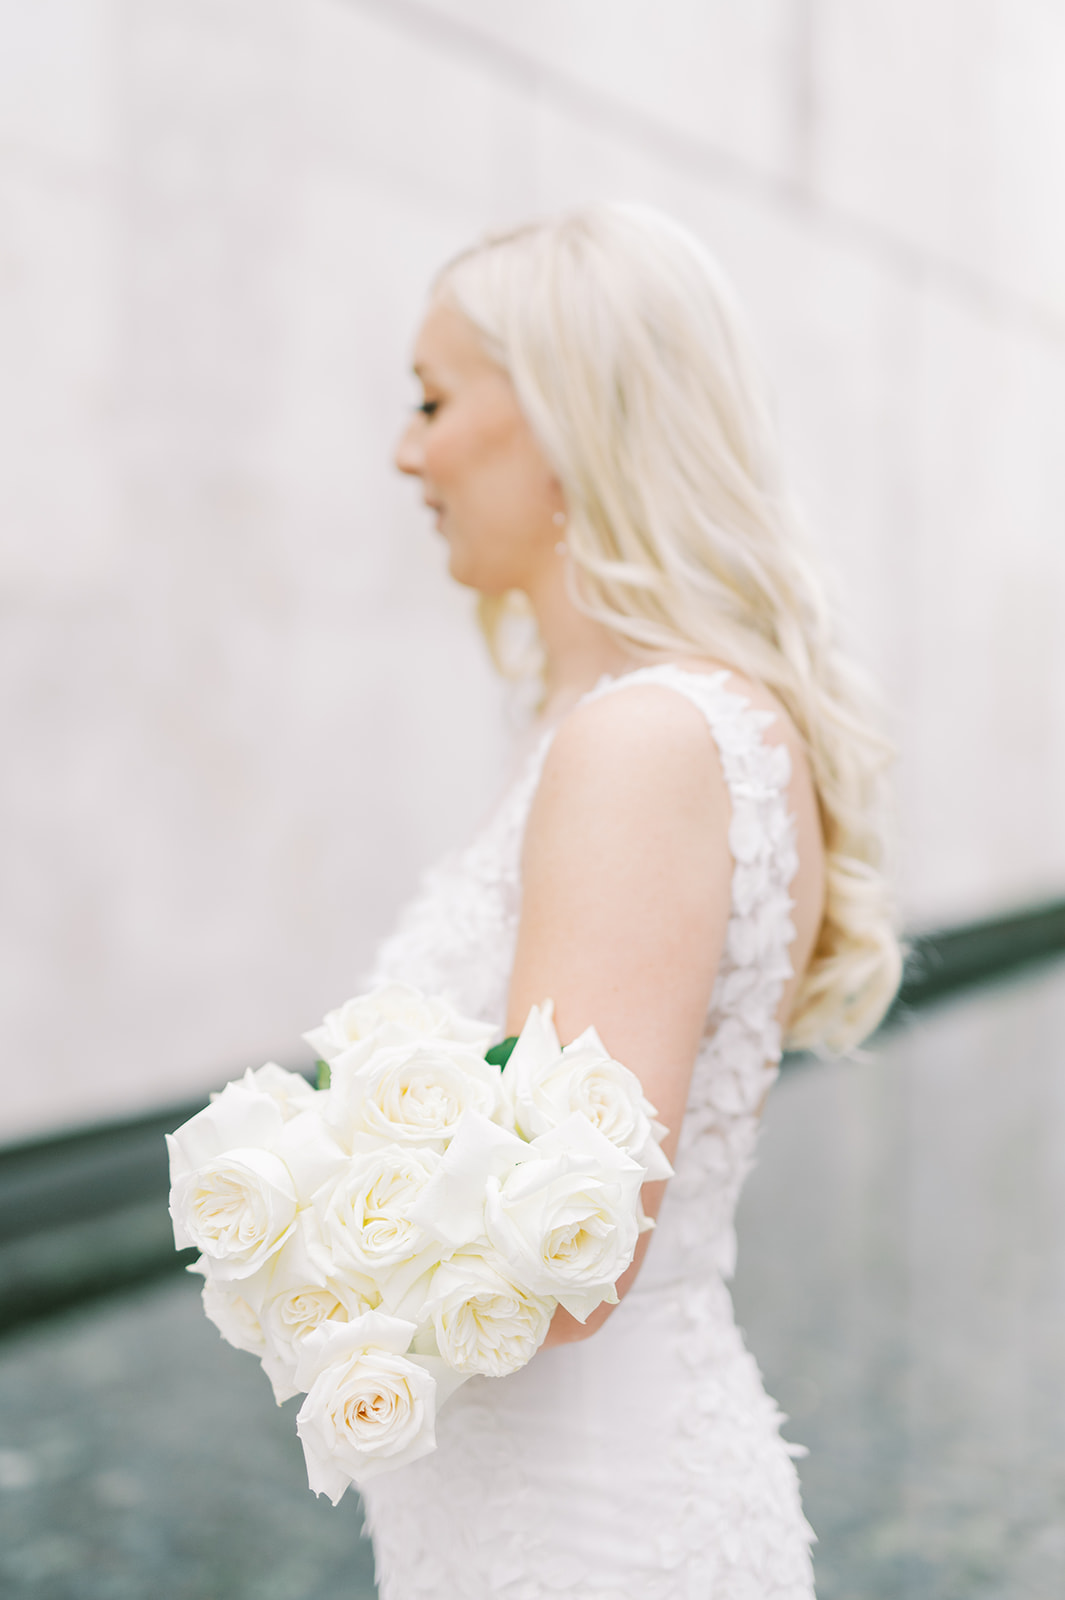 Bride looking away from camera with bouquet of white roses